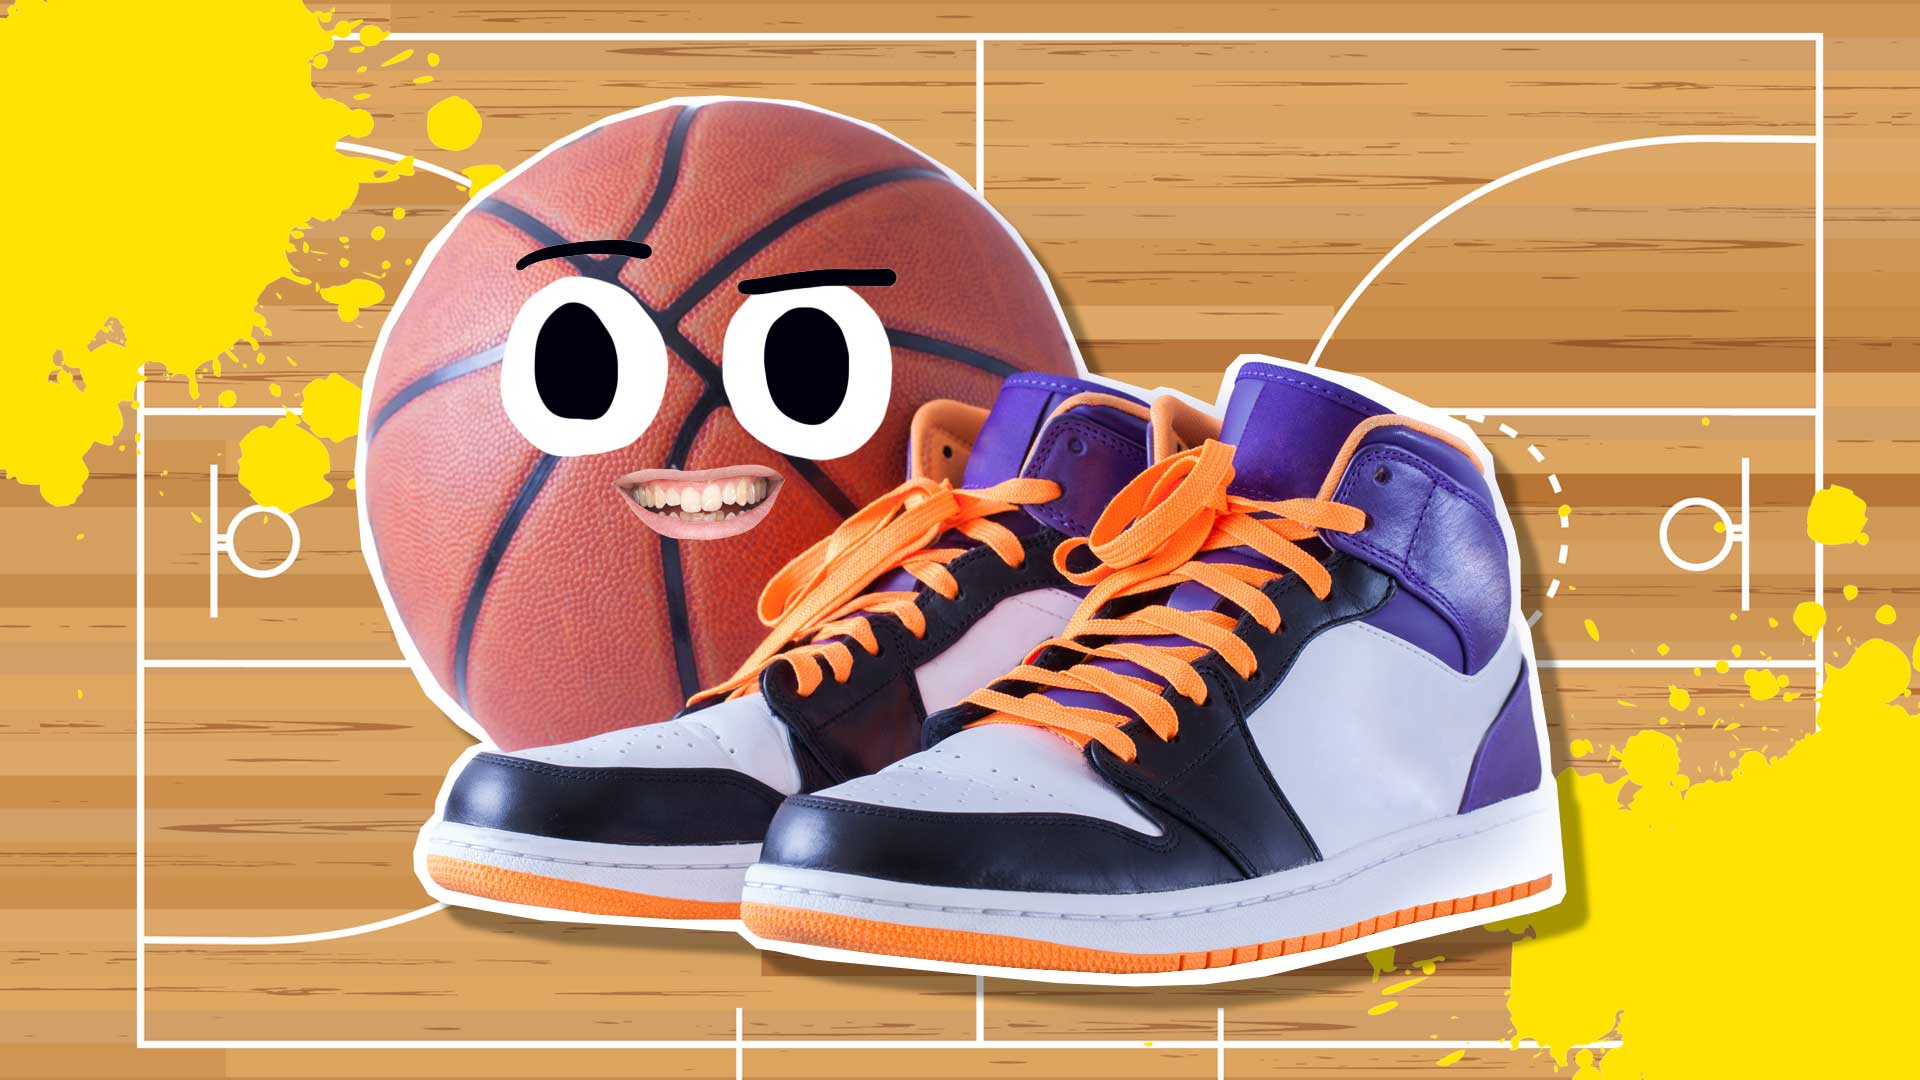 A pair of basketball boots